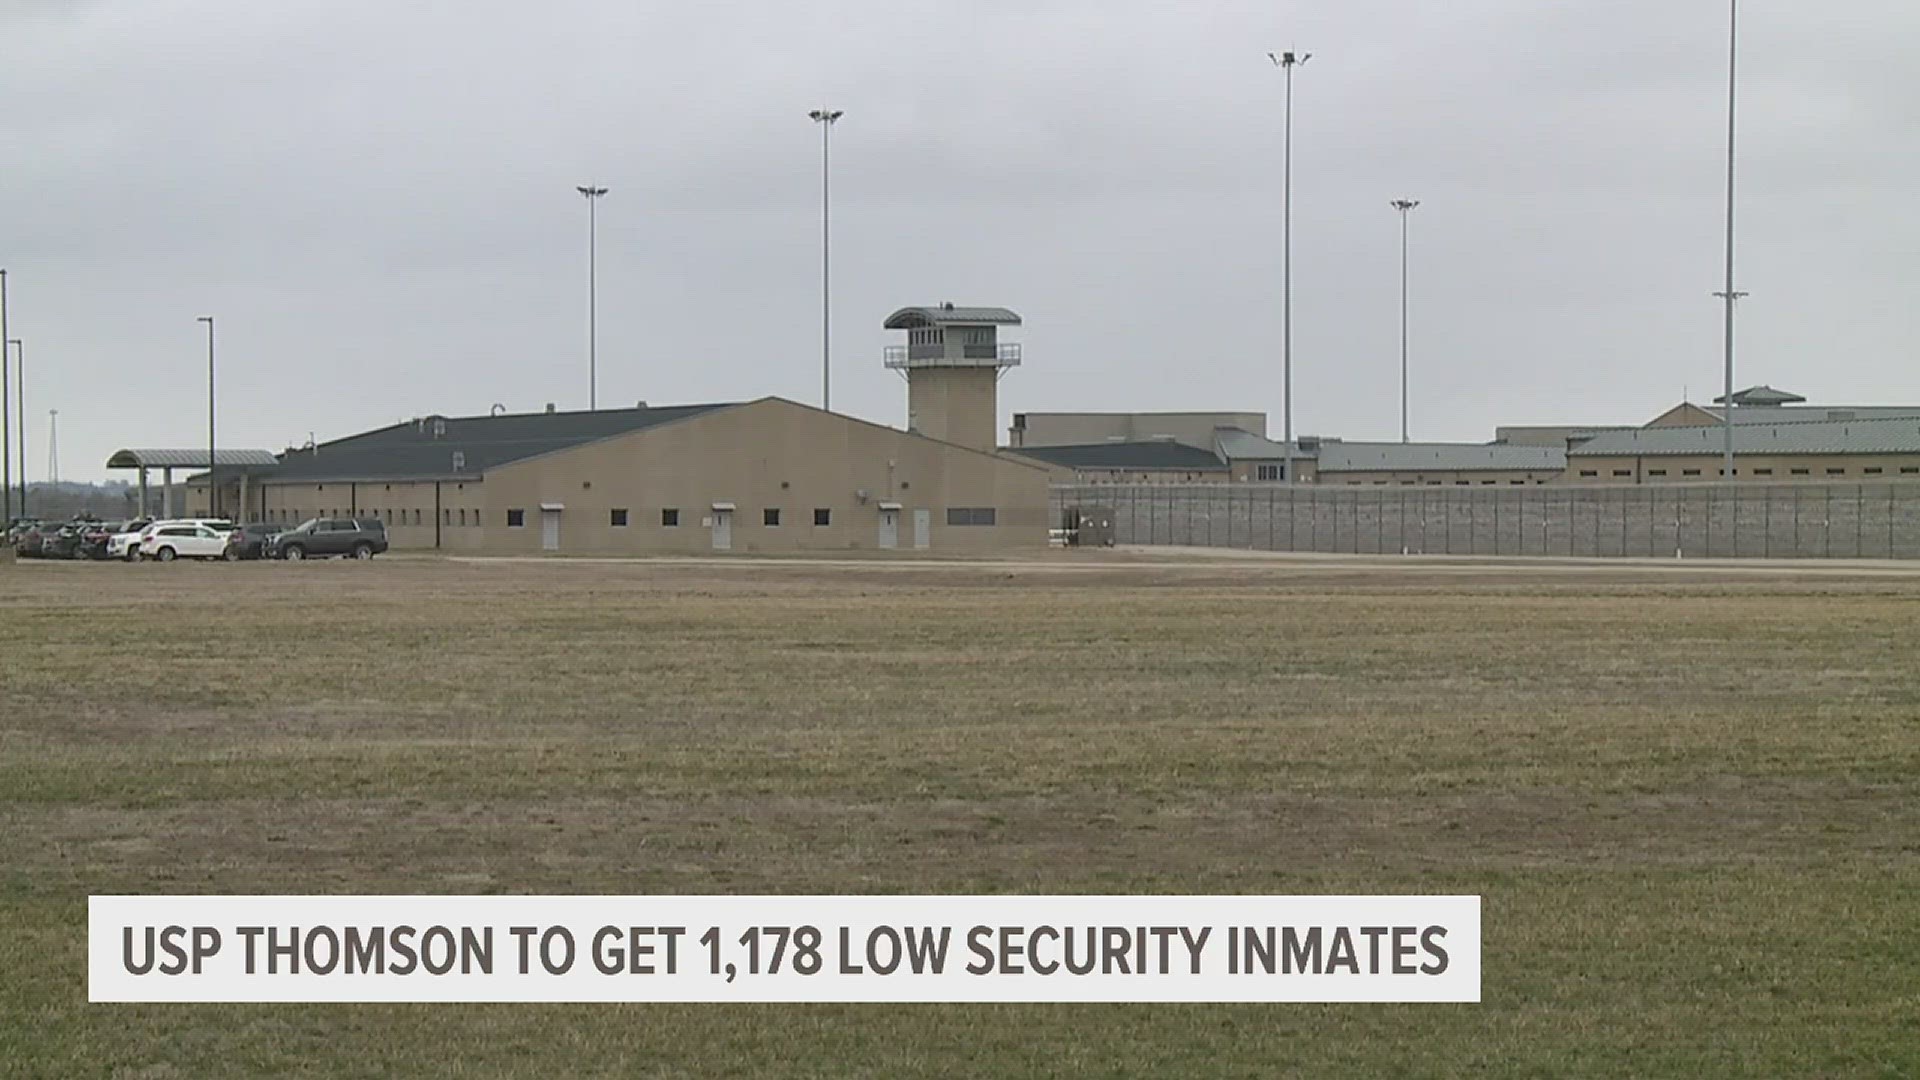 Illinois Sen. Dick Durbin confirmed the first unit of prisoners will begin arriving the week of April 10.